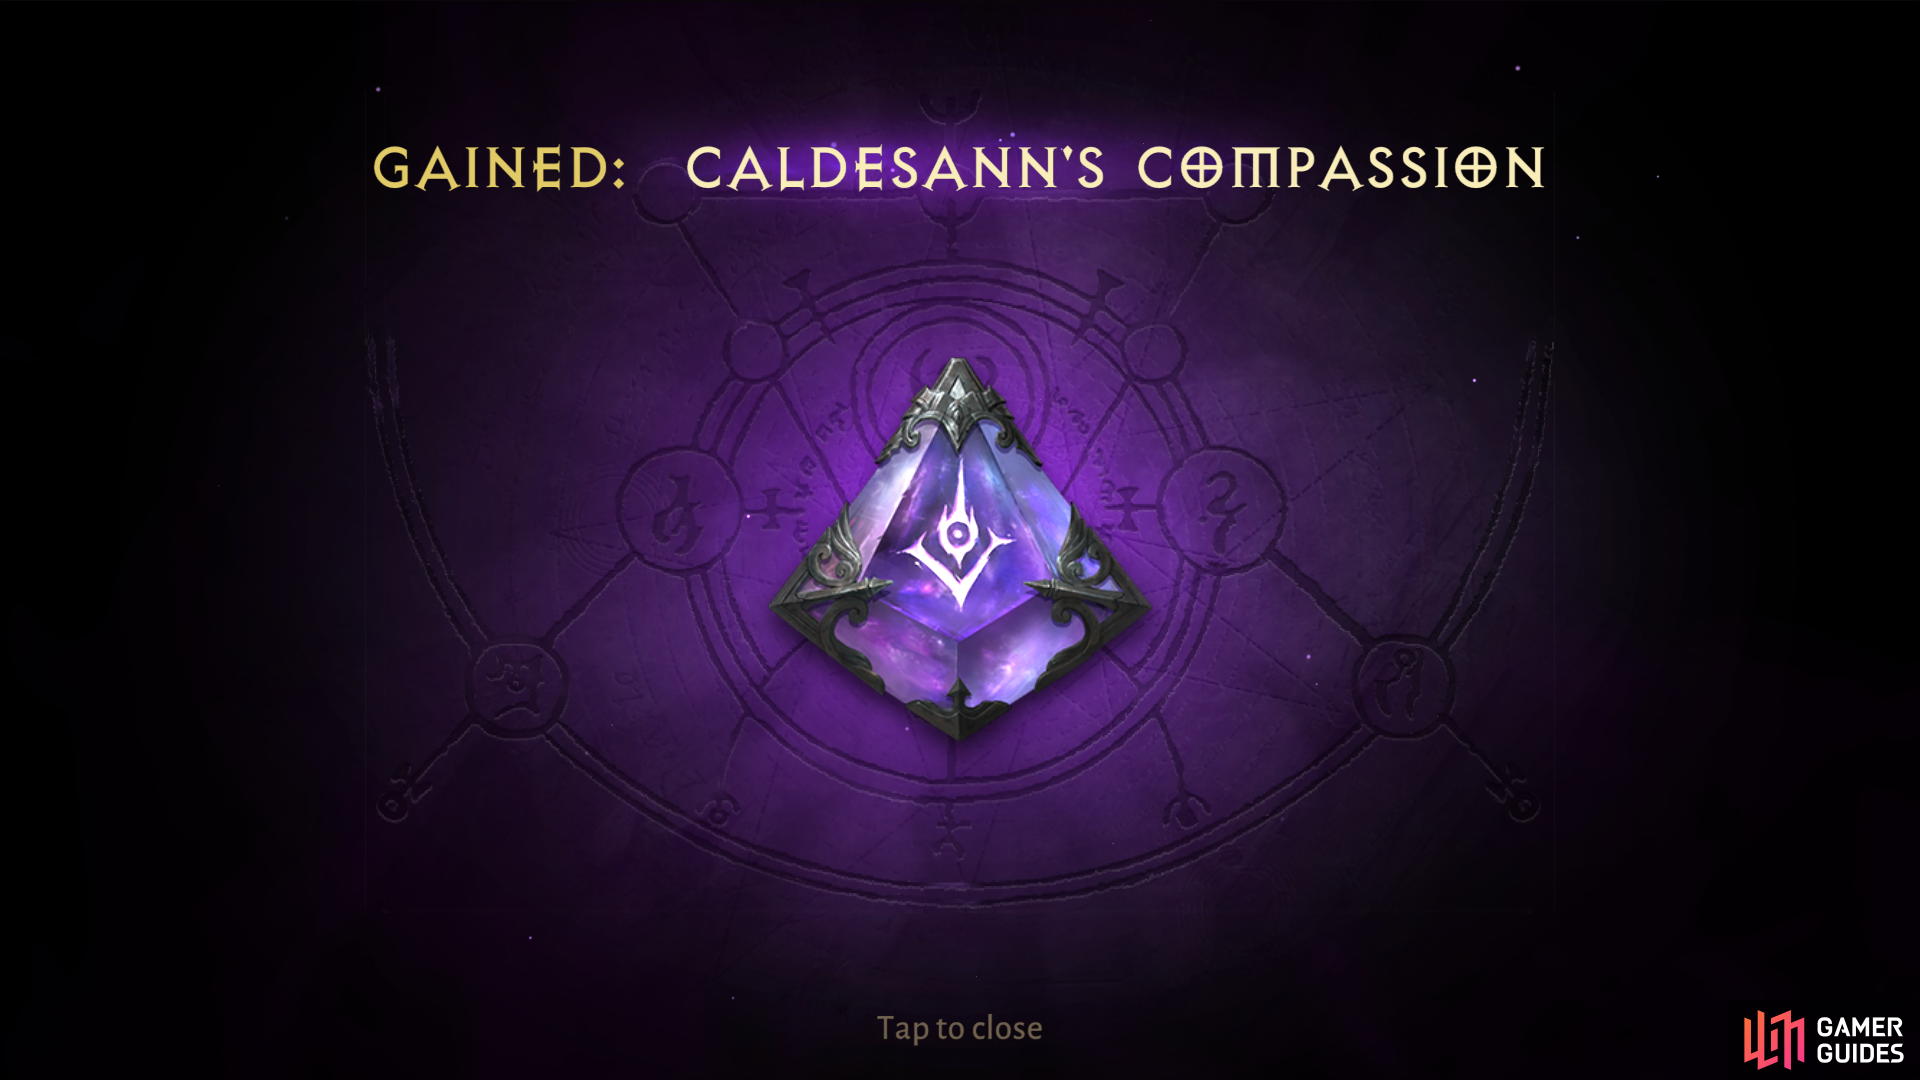 Caldesann’s Compassion will be acquired after finishing the 10th level of the Challenge Rift.